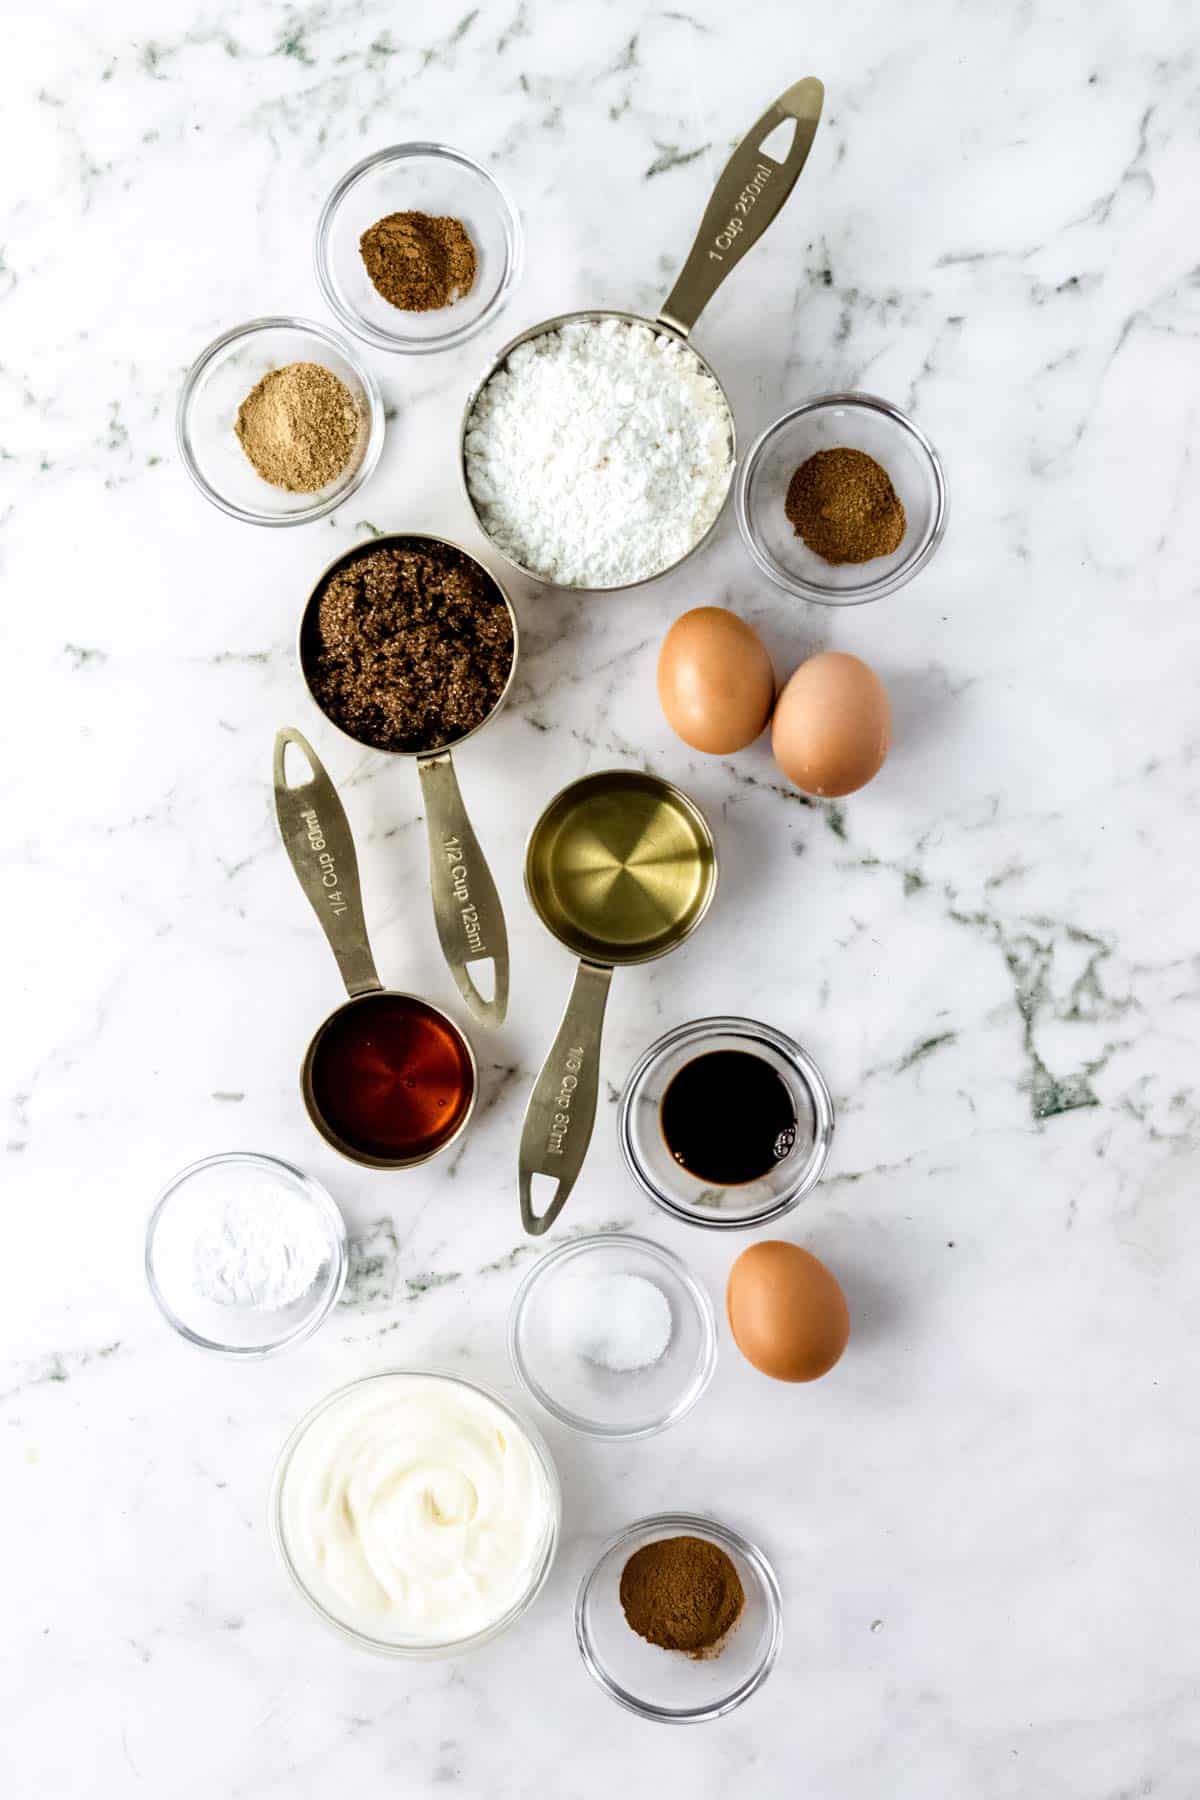 The ingredients for a homemade gluten-free gingerbread loaf.